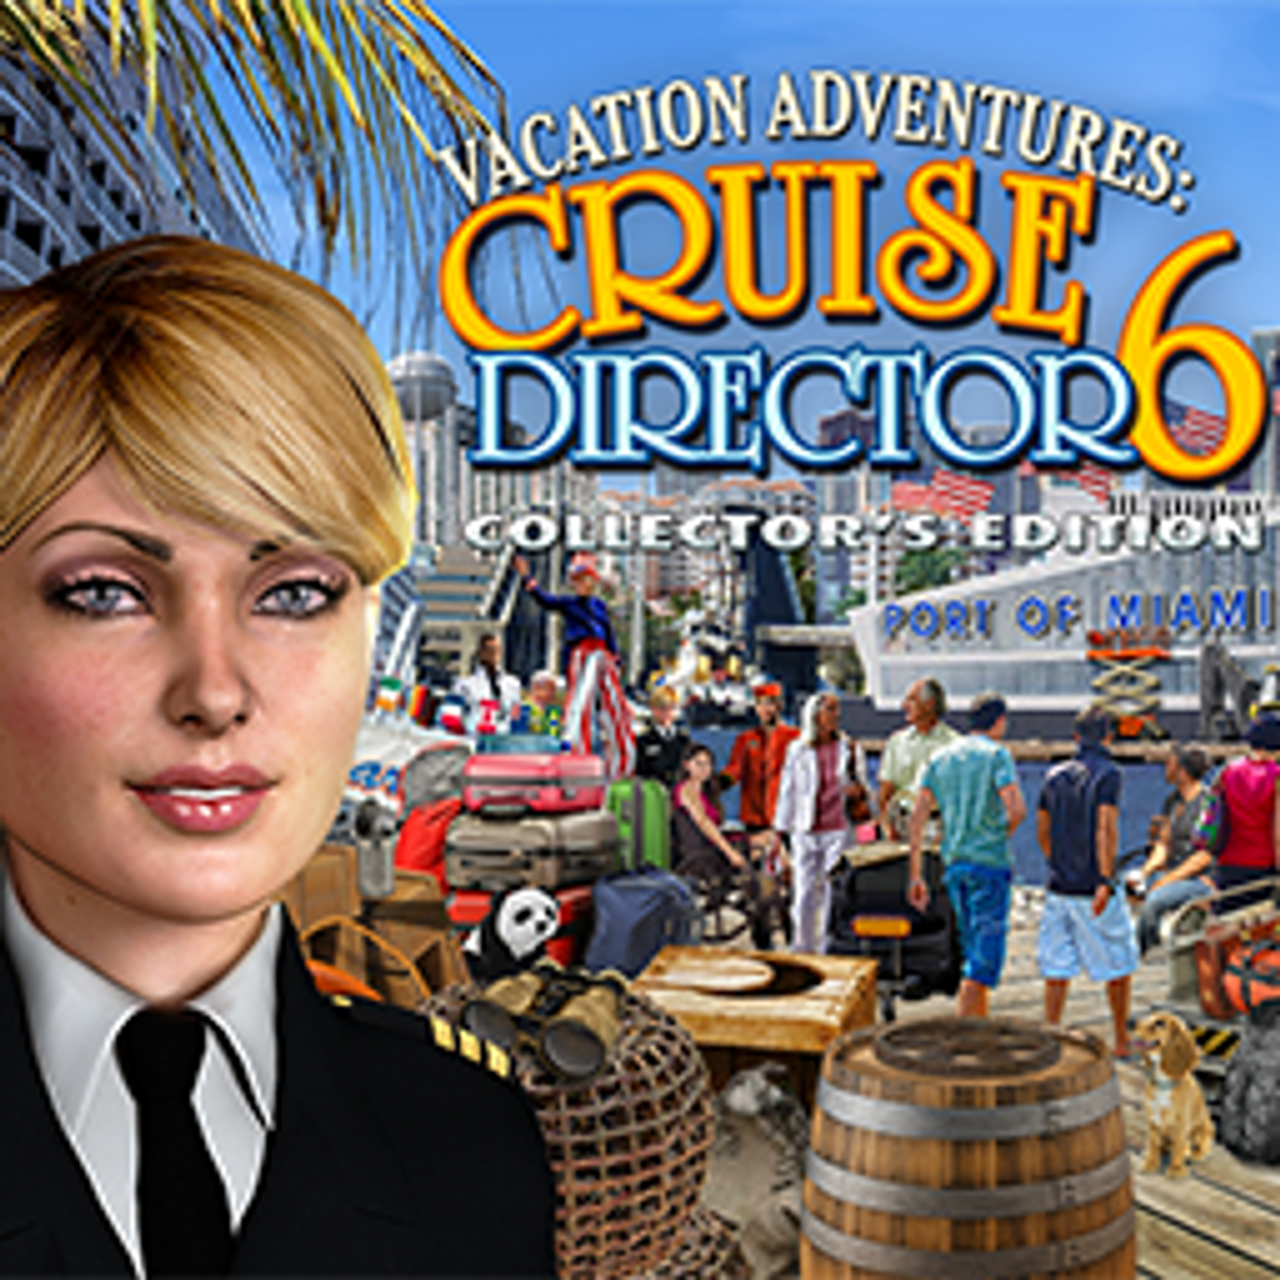 Vacation Adventures: Cruise Director 6 Collector's Edition